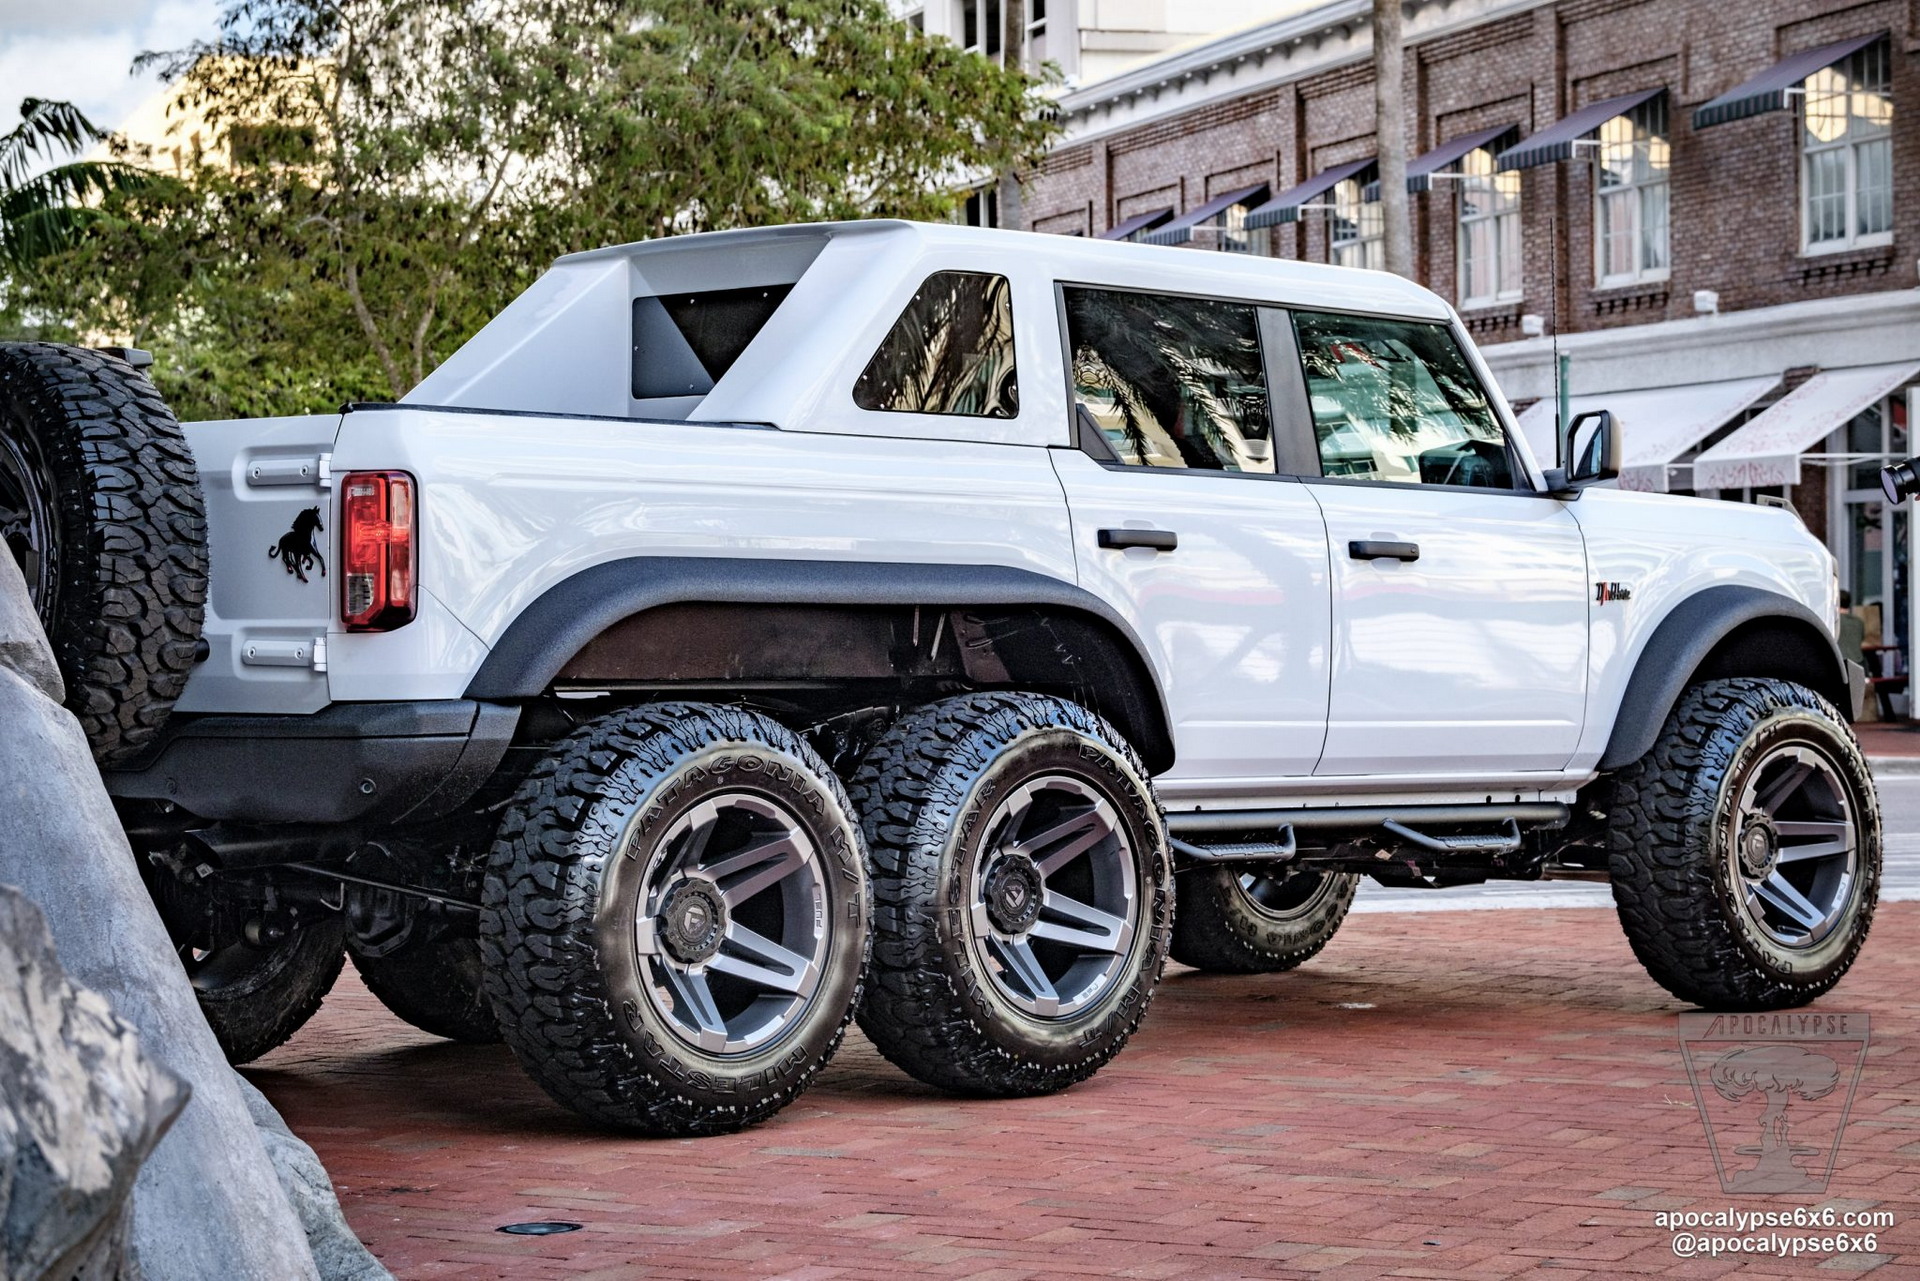 Apocalypse's 'The Dark Horse' Is a Fully-Bespoke 400-HP Ford Bronco 6×6